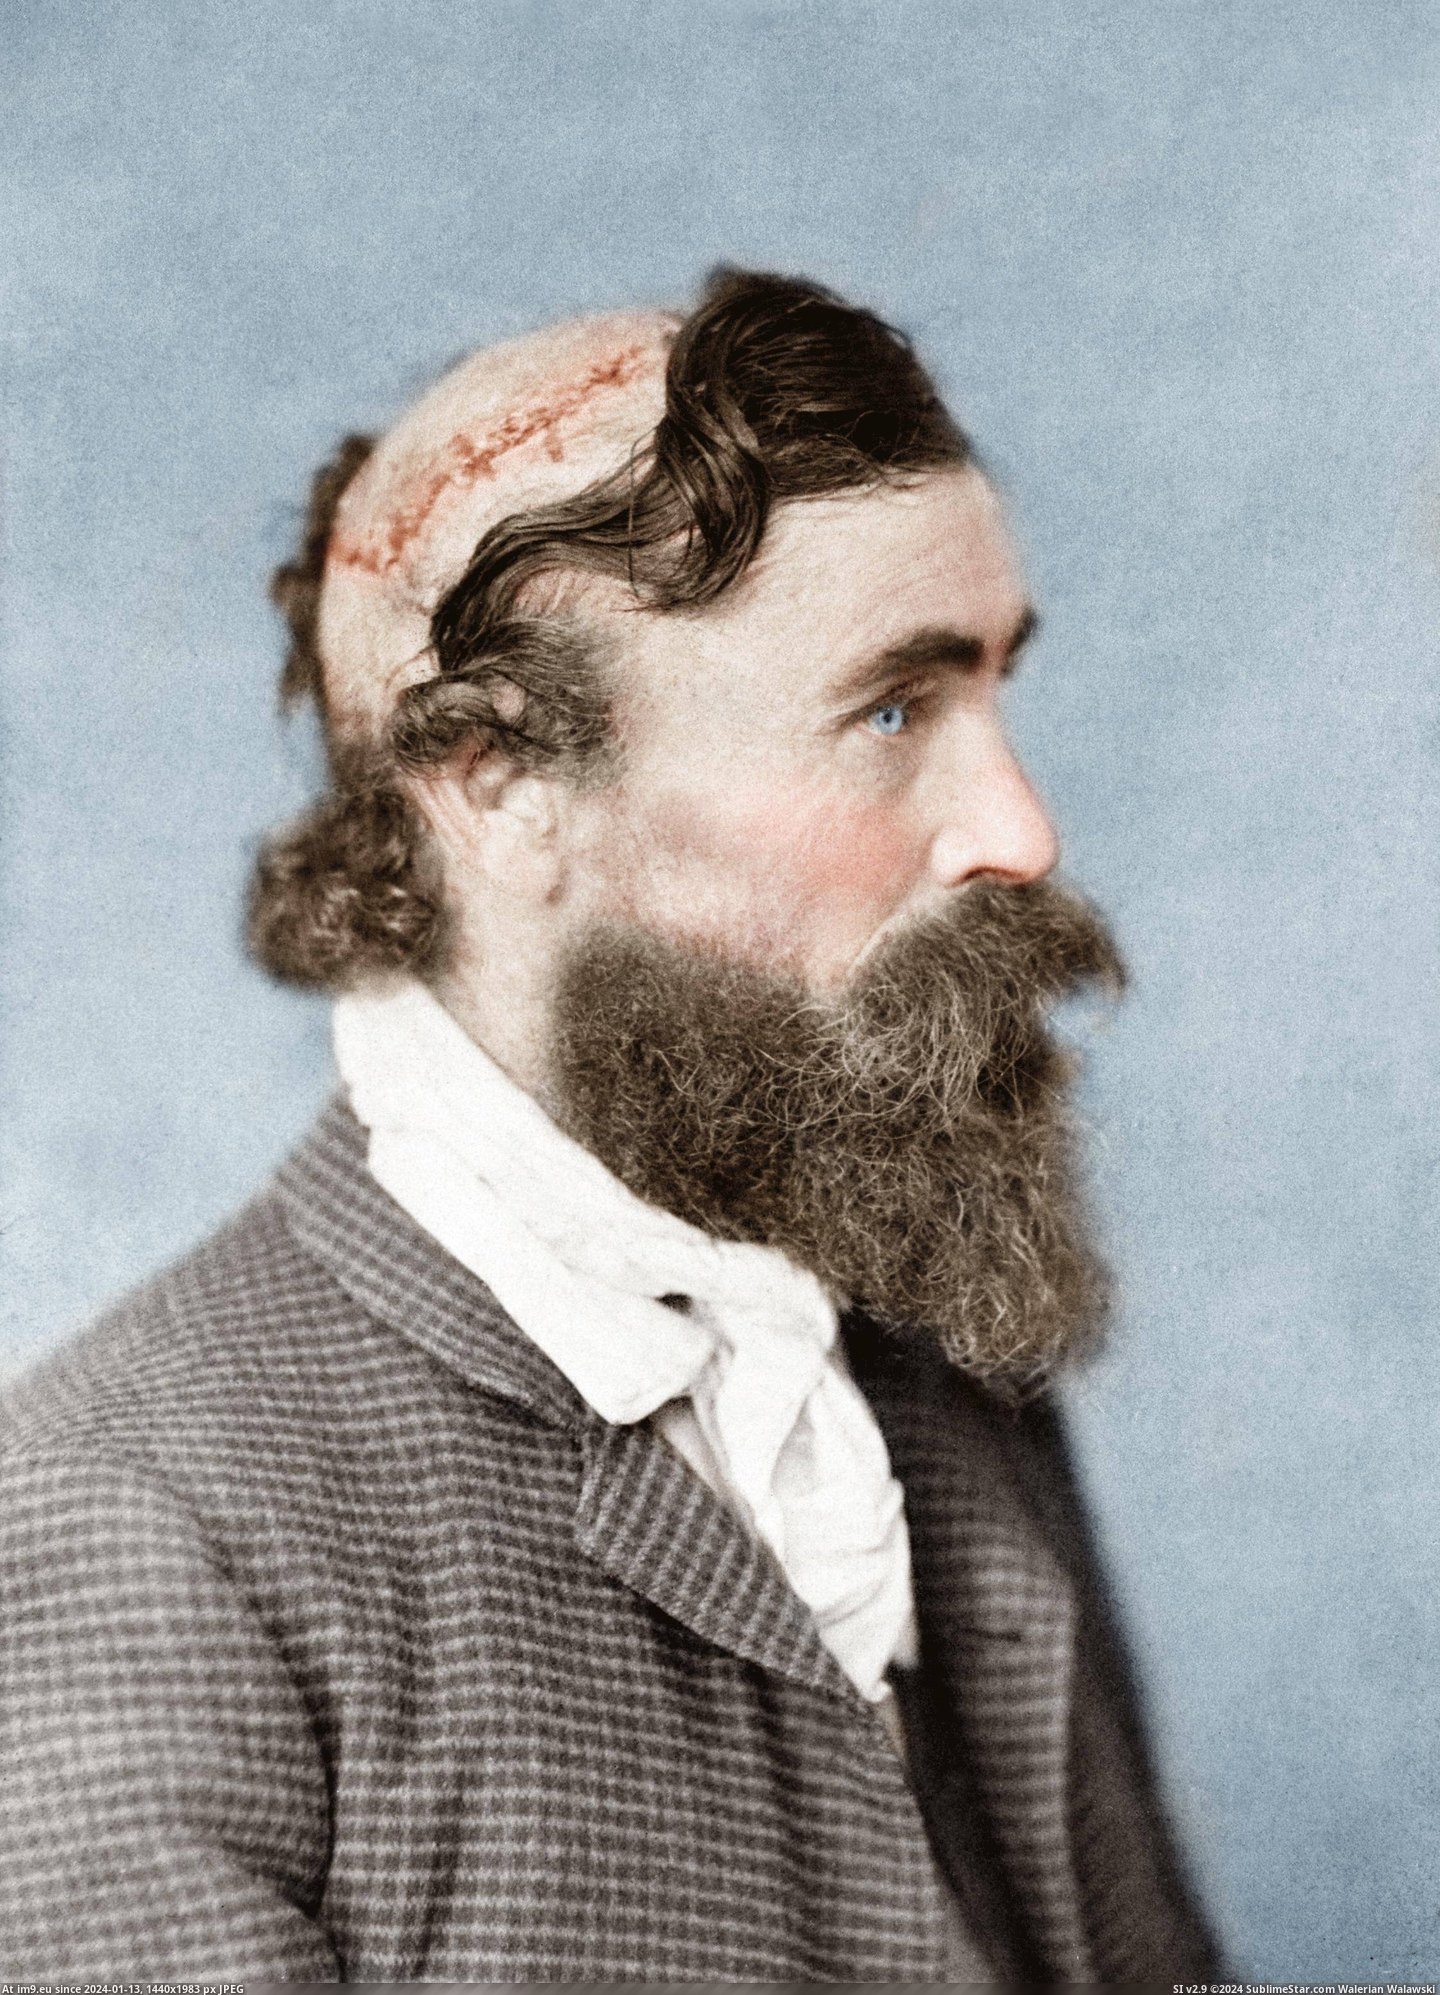 #Wtf #Was #Man #Sioux #Chief #Mcgee #Scalped #Child #Turtle #Robert [Wtf] Robert McGee, a man who was scalped as a child by the Sioux Chief Little Turtle, 1864 Pic. (Изображение из альбом My r/WTF favs))